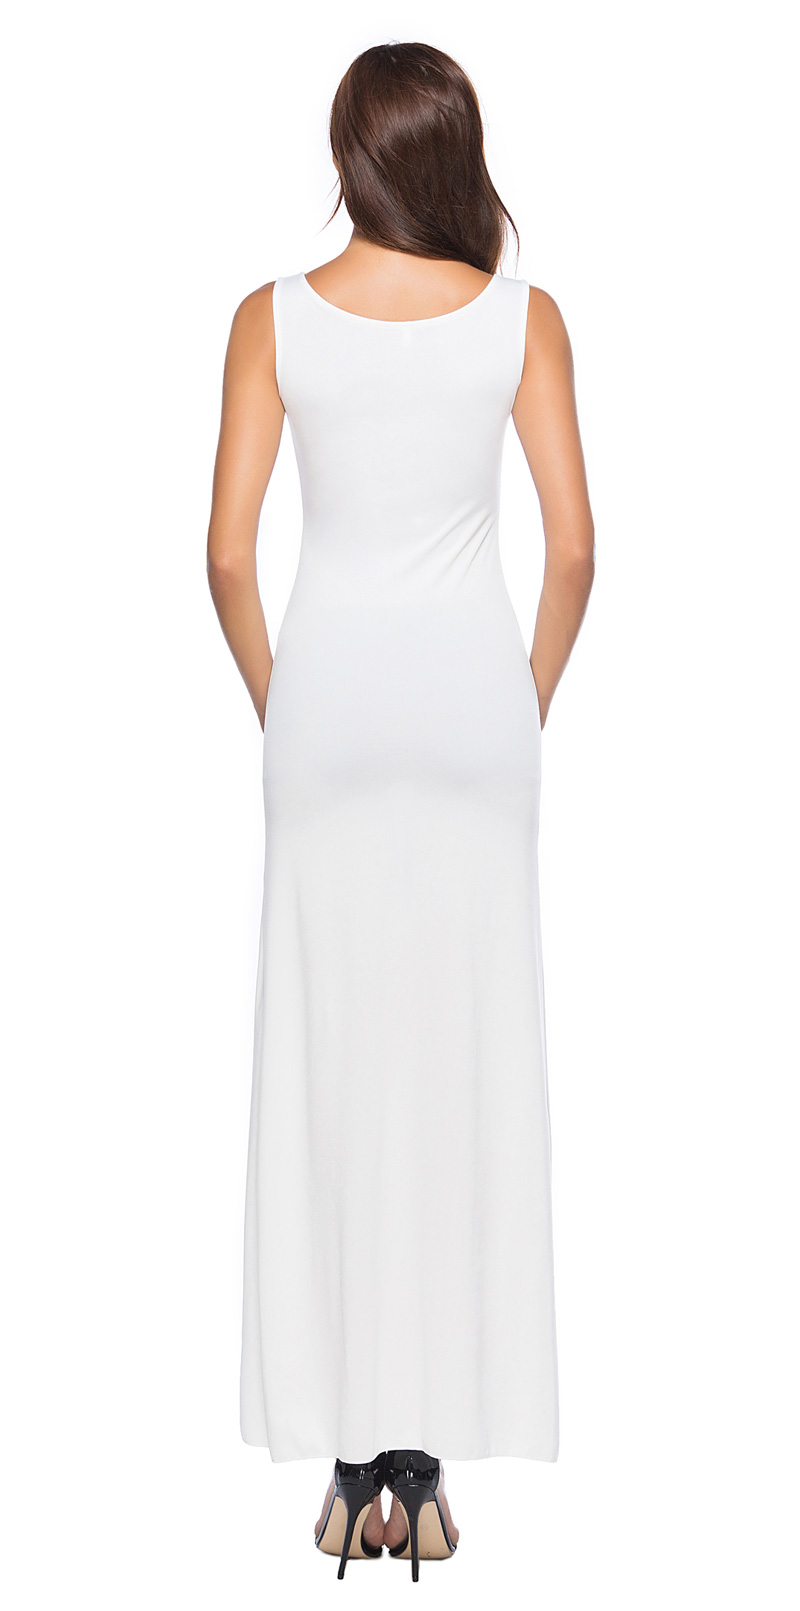 Solid Maxi Dress White